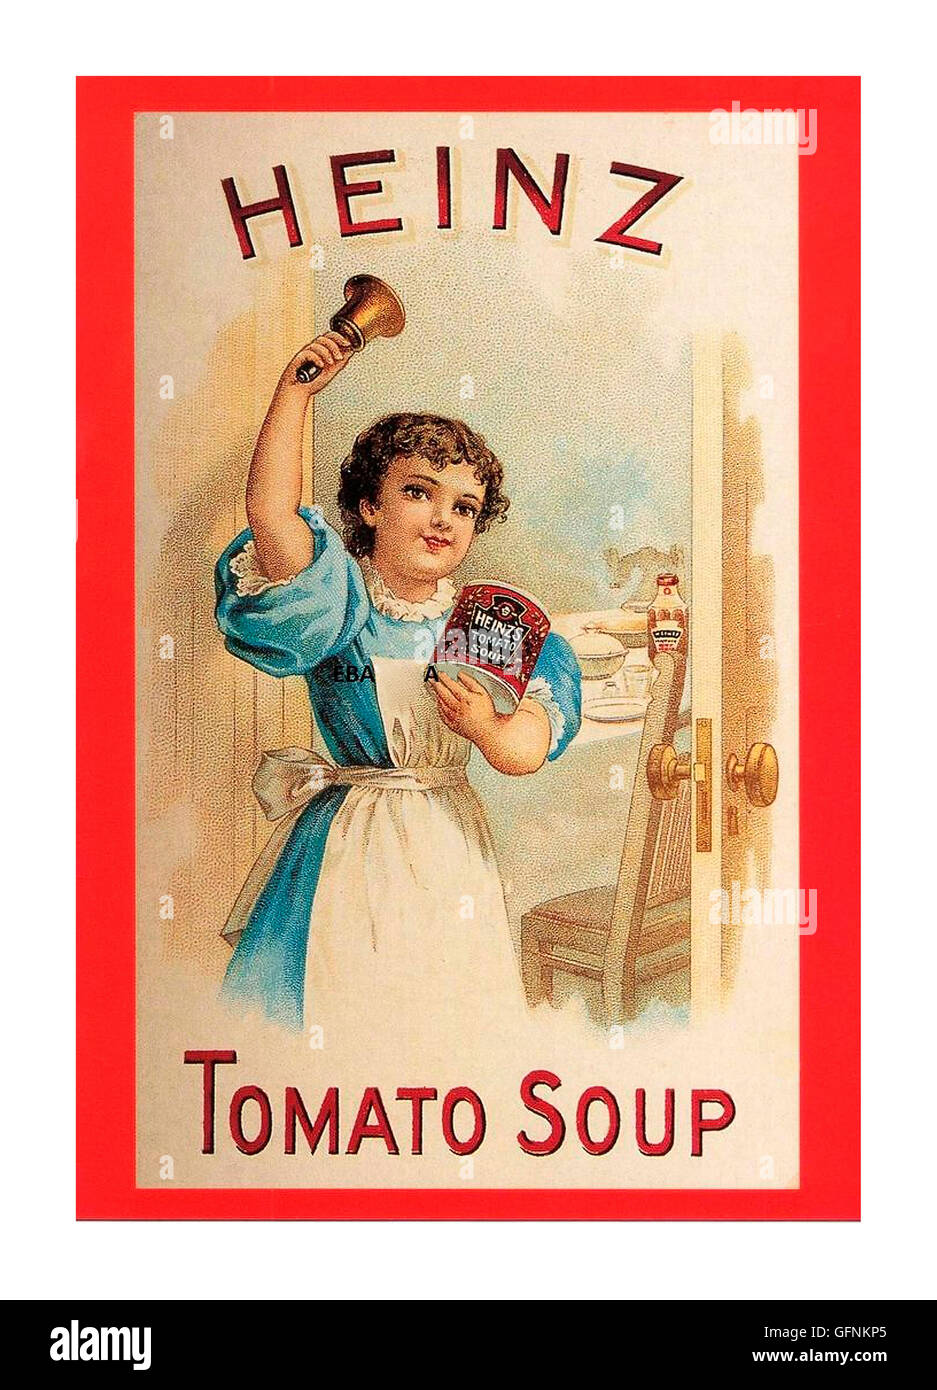 HEINZ SOUP Vintage historic 1900's advertising poster for Heinz Tomato Soup historic tinned food soup foodstuffs Stock Photo